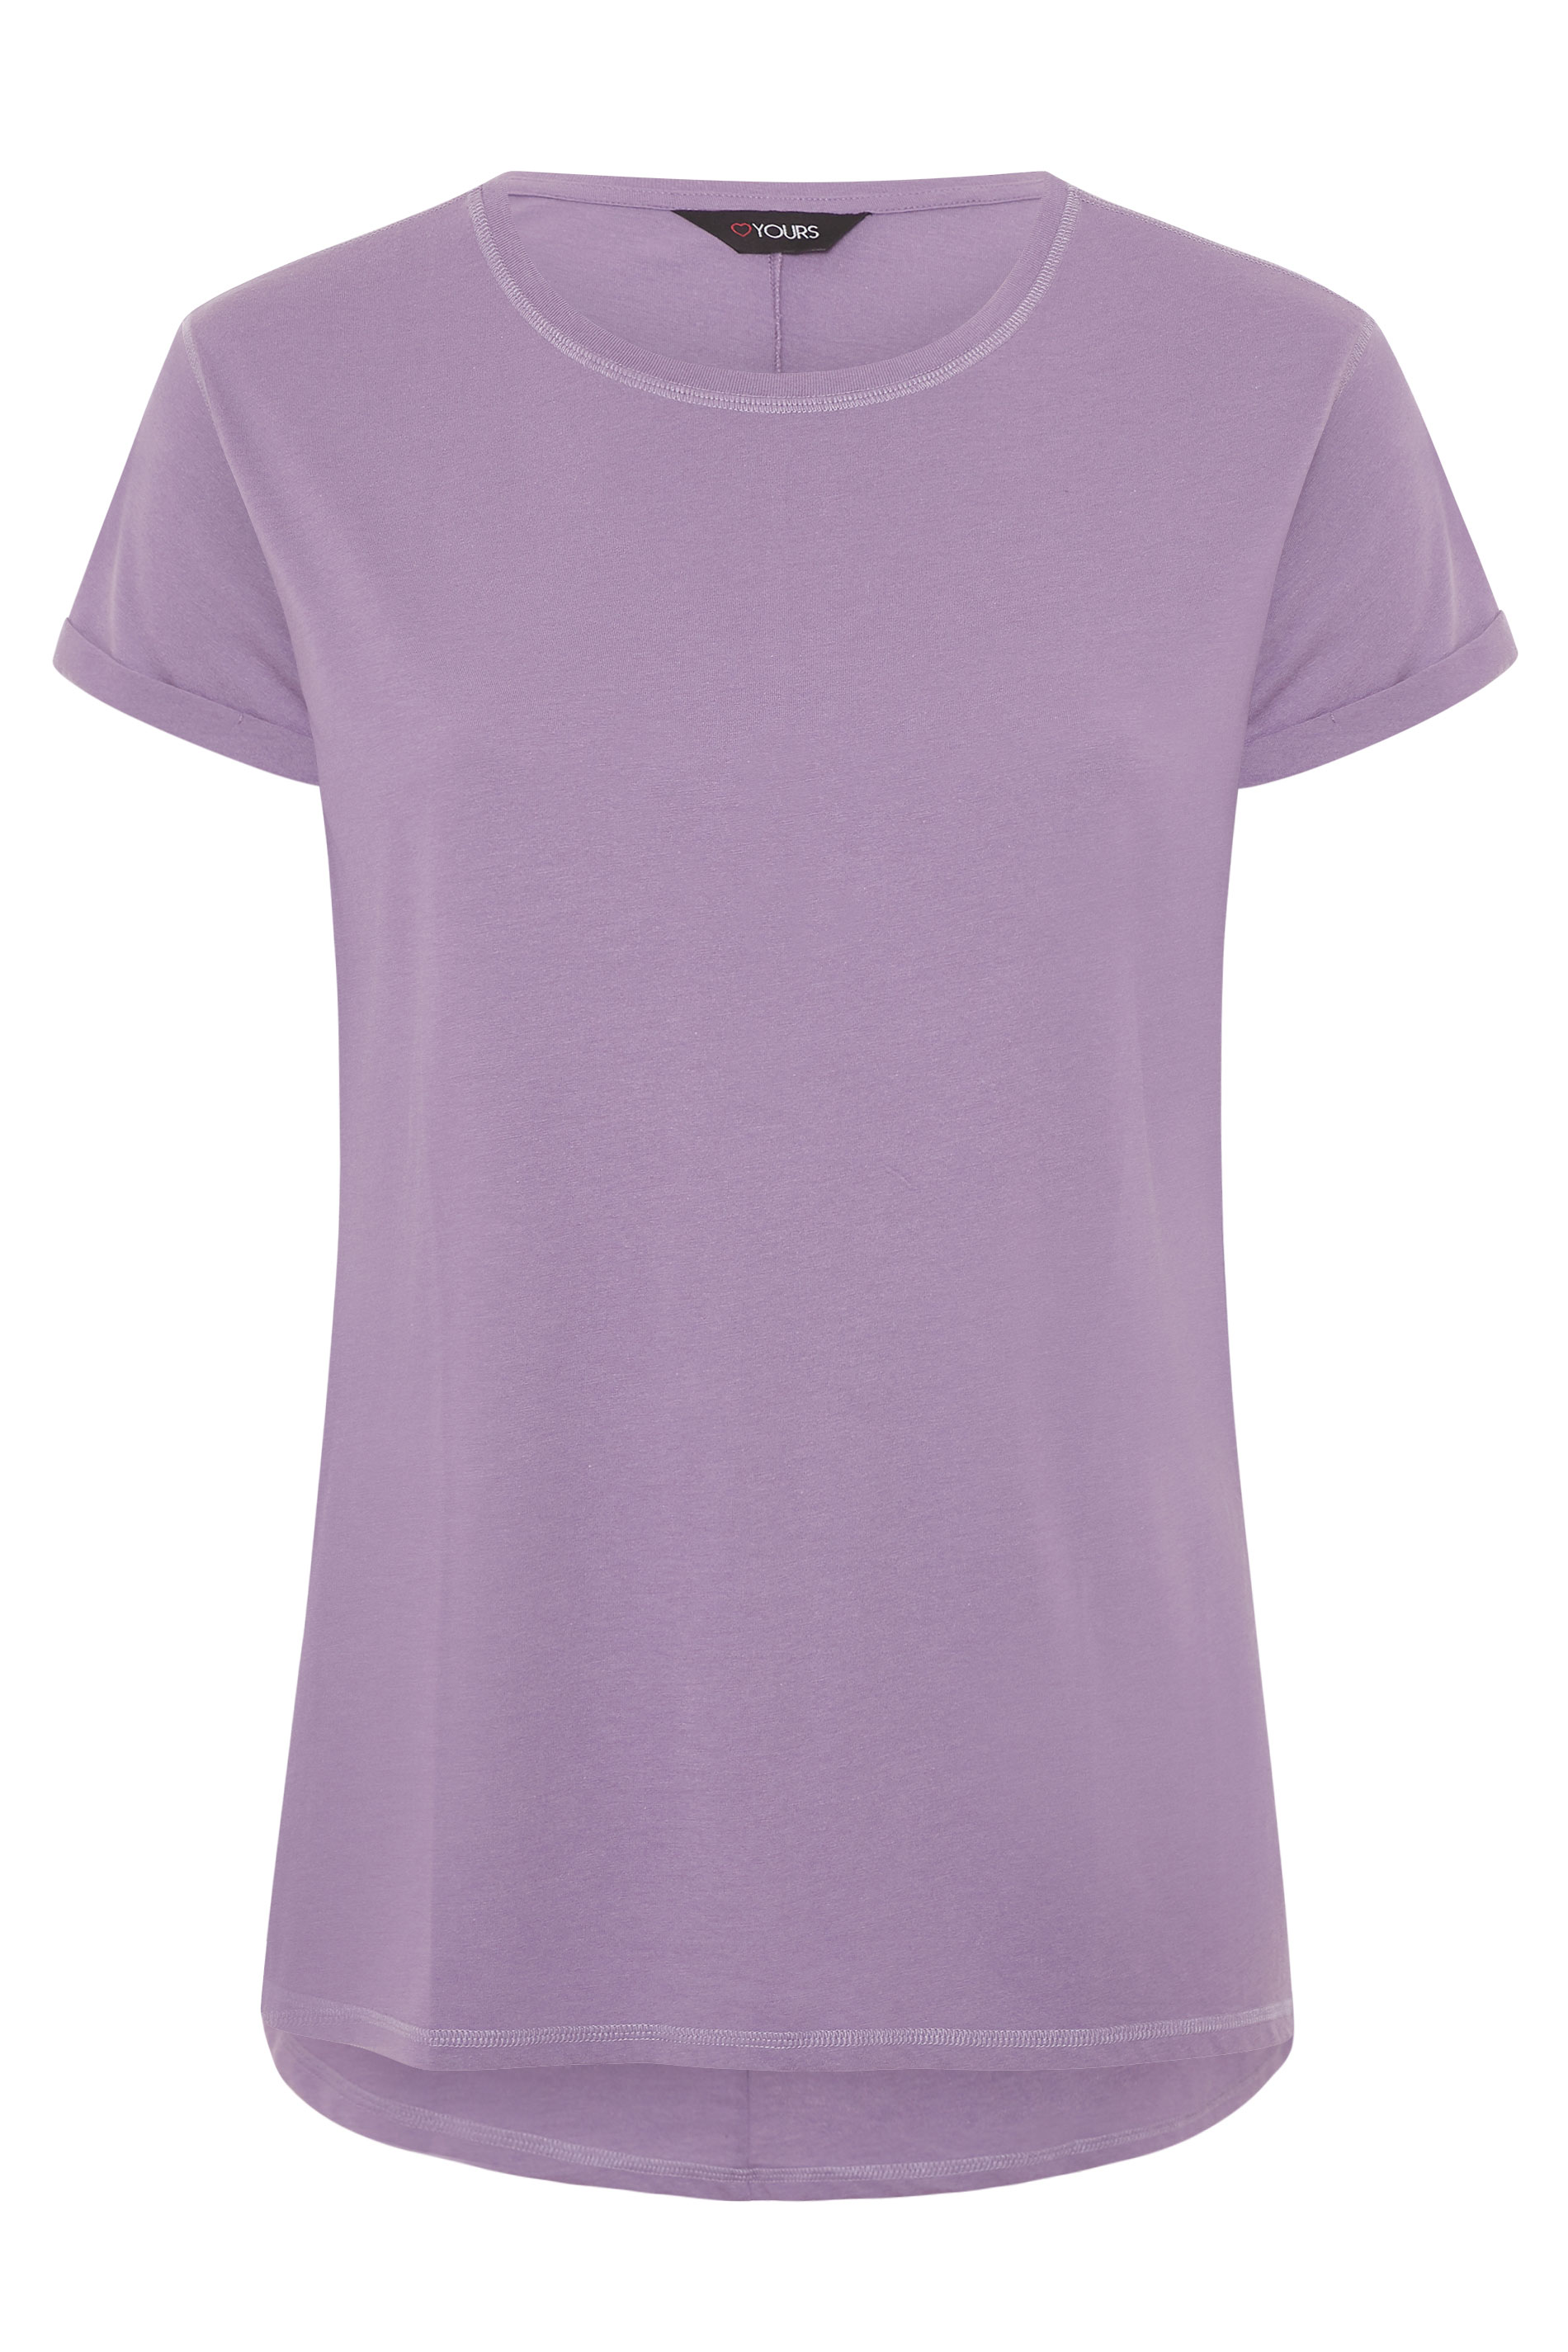 Lilac Topstitch Short Sleeve T Shirt Yours Clothing